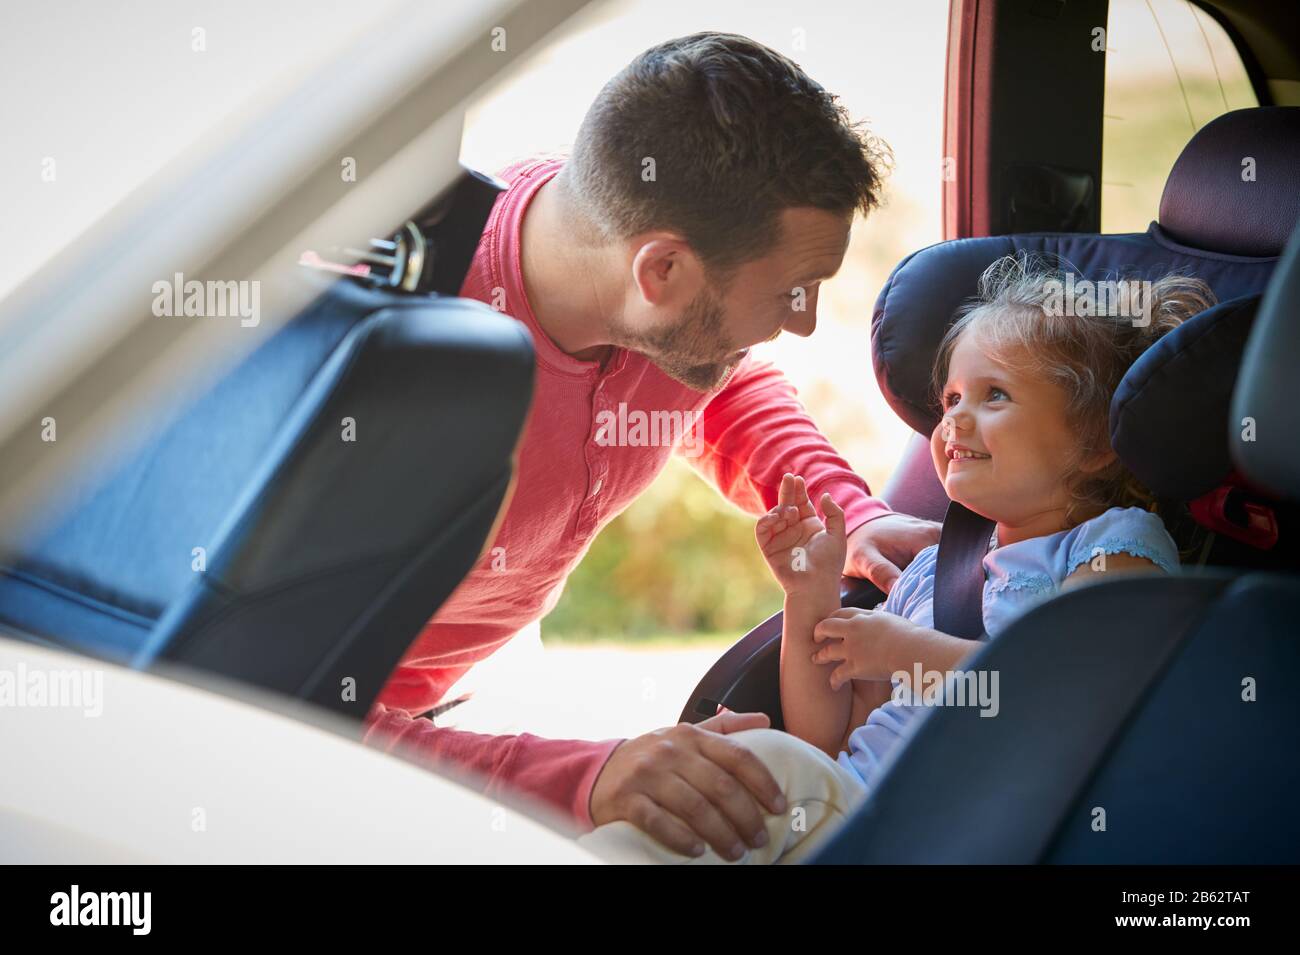 Father Securing Daughter Into Rear Child Seat Before Car Journey Stock Photo